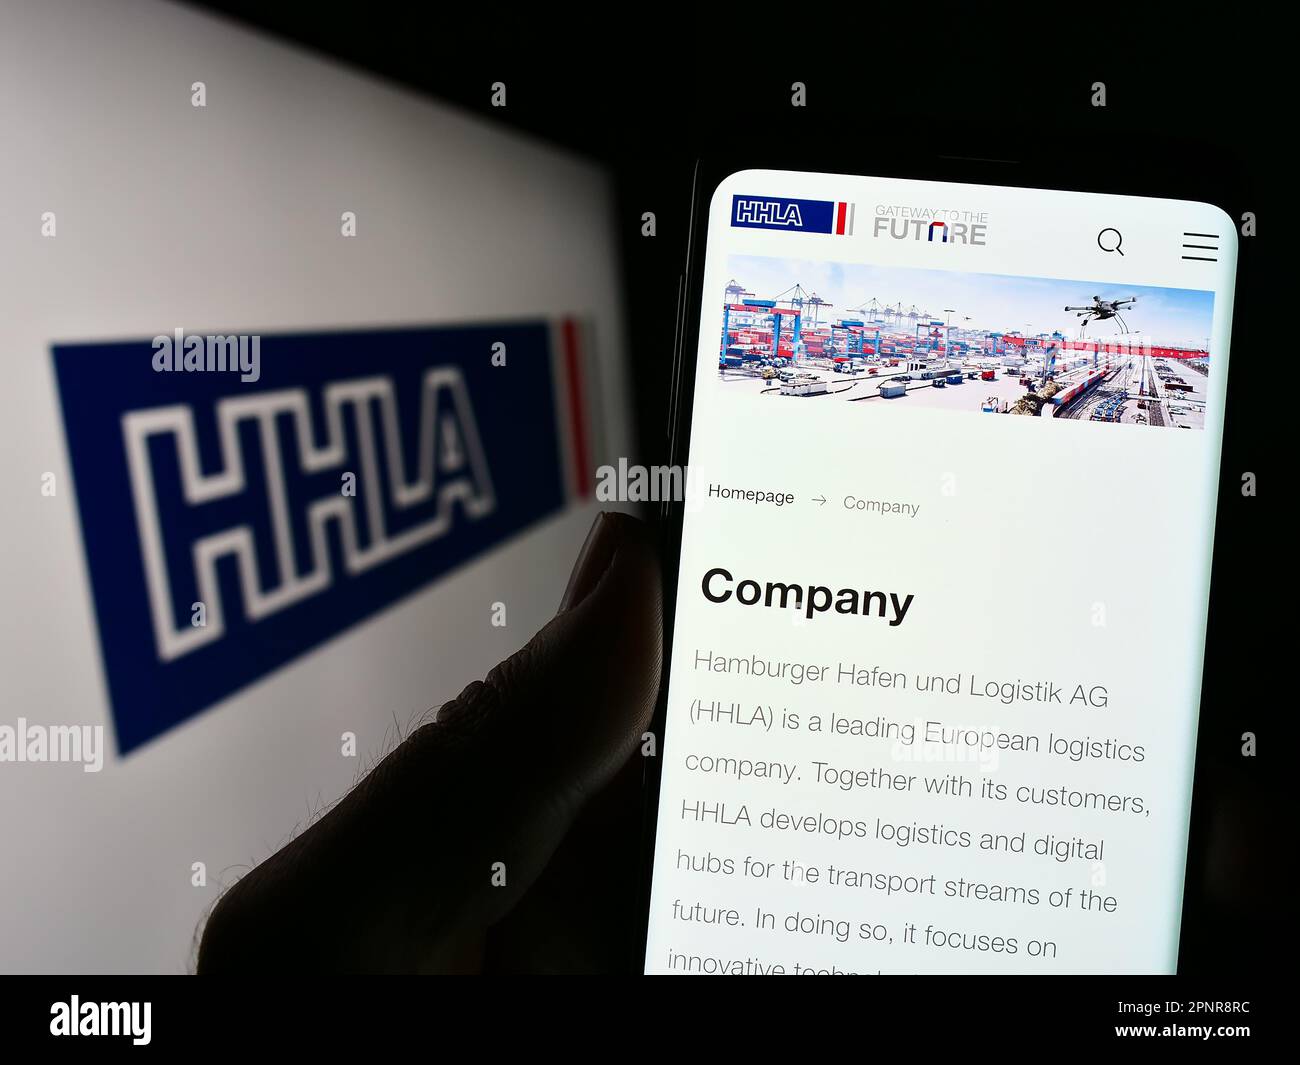 Person holding smartphone with webpage of company Hamburger Hafen und Logistik AG (HHLA) on screen with logo. Focus on center of phone display. Stock Photo